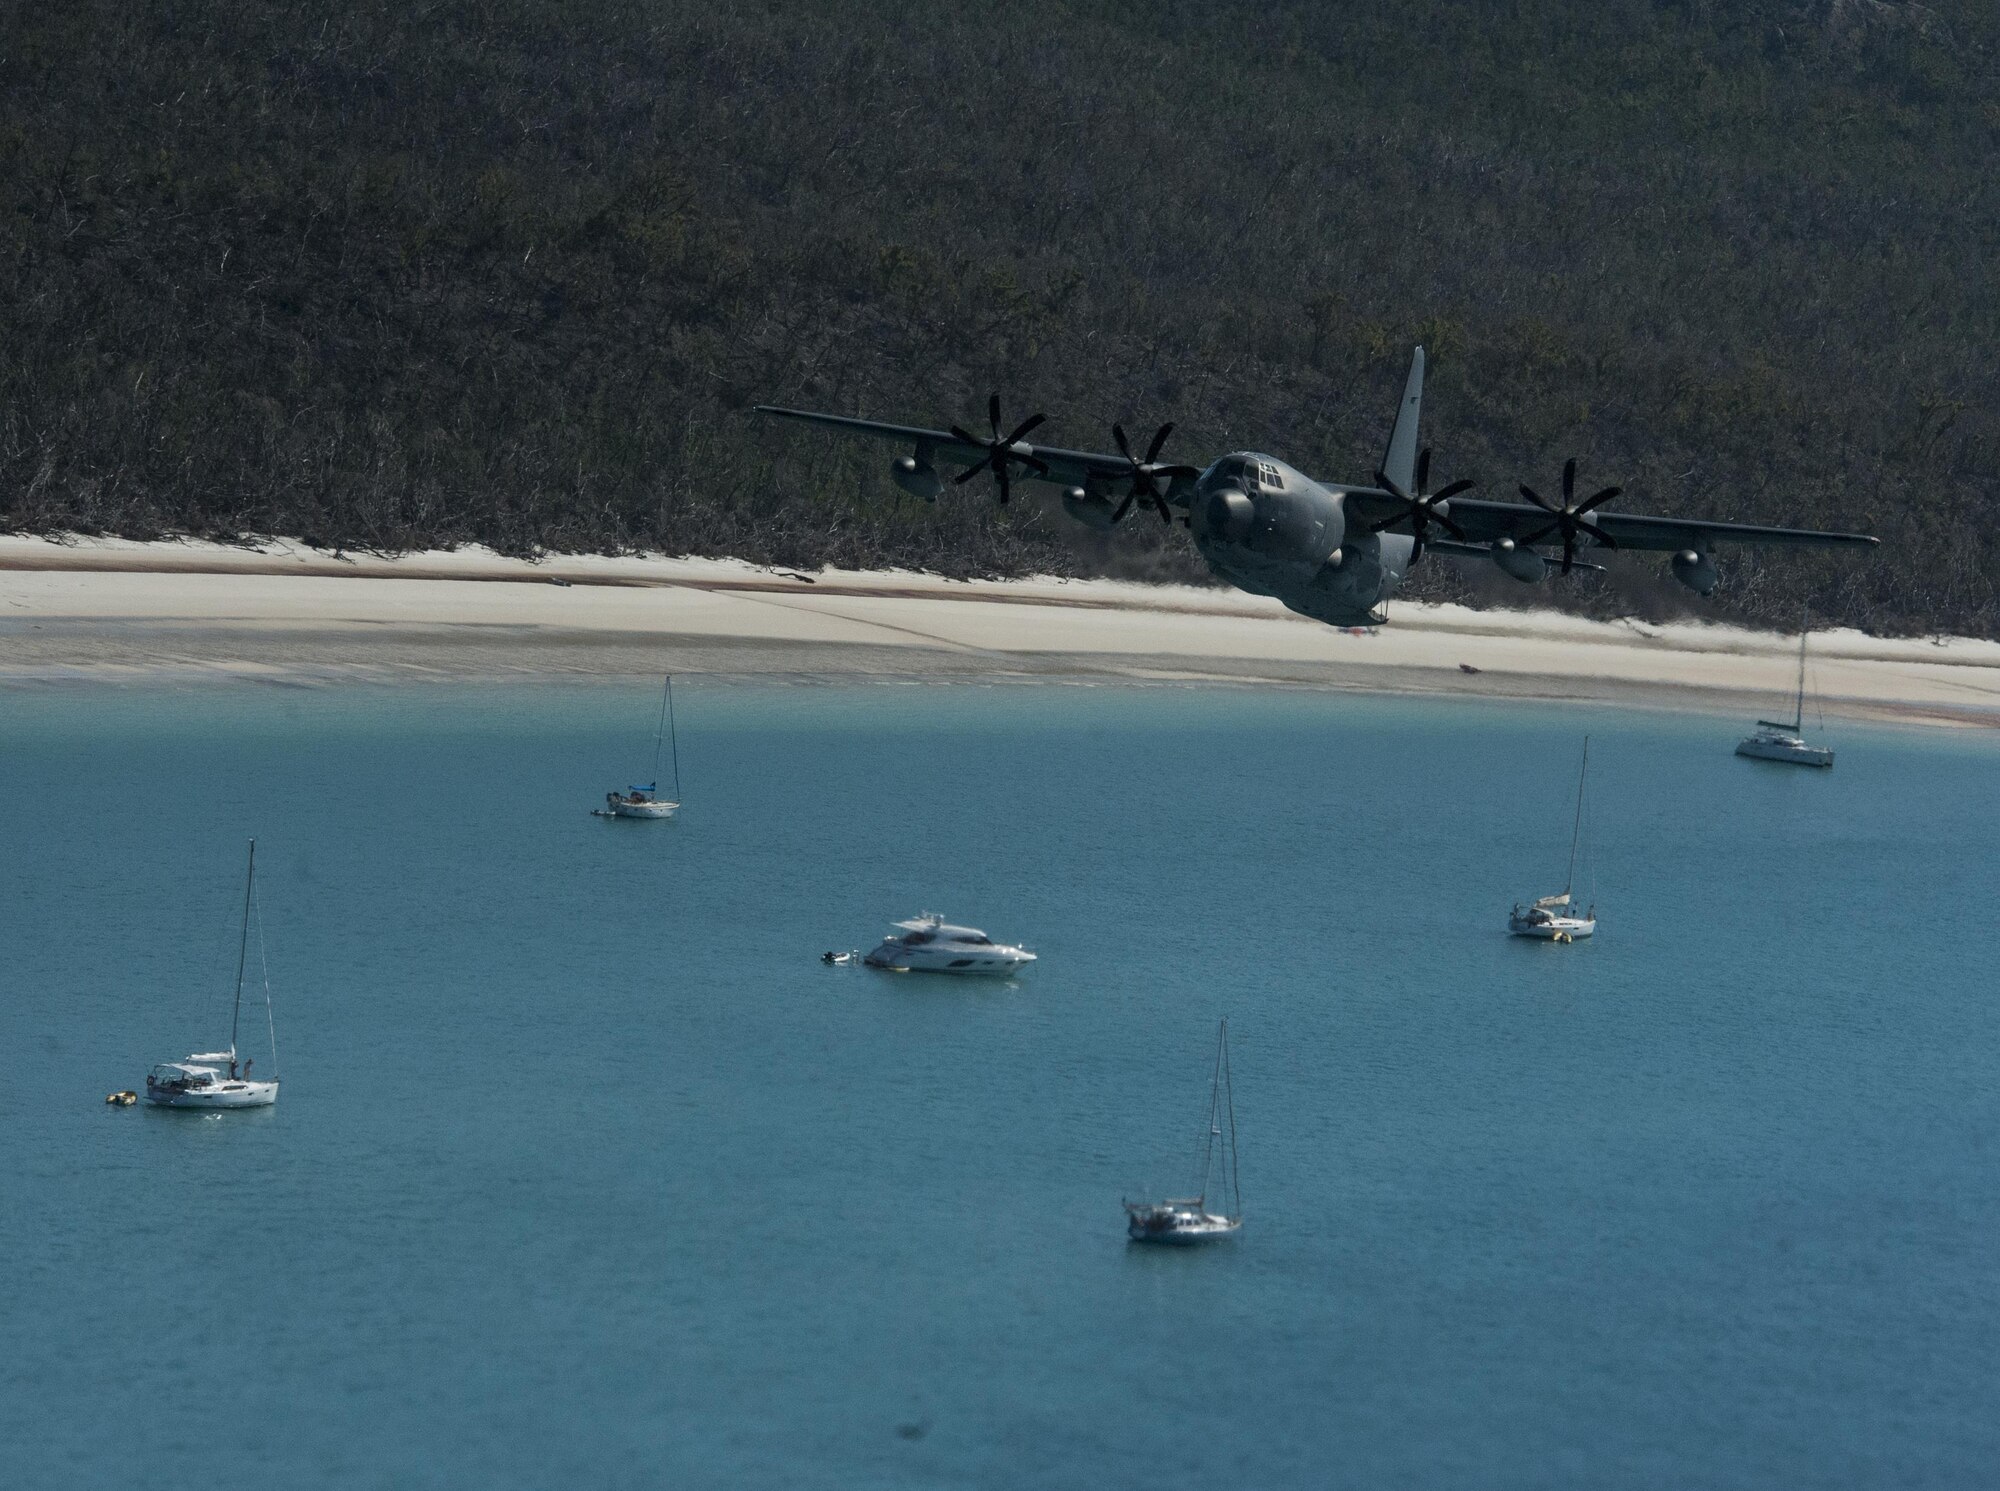 A U.S. Air Force 17th Special Operations Squadron MC-130J Commando II flies in dissimilar formation with a No. 37 Squadron Royal Australian Air Force C-130J Hercules July 19, 2017, over Queensland, Australia. The development of dissimilar formation tactics, training and procedures enables greater interoperability between the U.S. and Australian militaries. (U.S. Air Force photo by Capt. Jessica Tait)